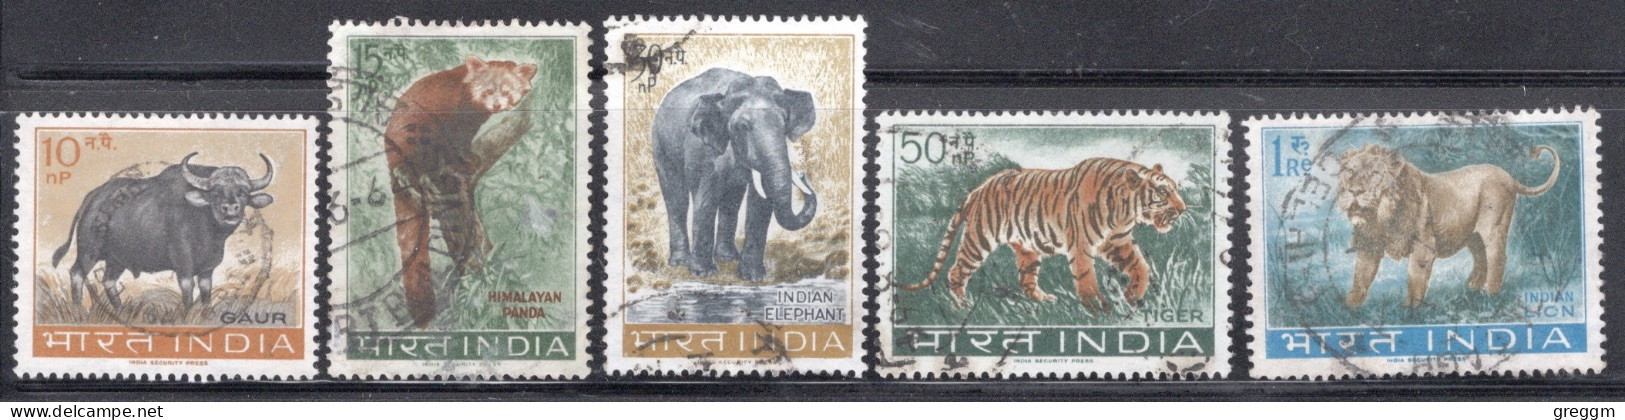 India 1963 Set Of Stamps To Celebrate Wildlife Conservation In Fine Used - Oblitérés